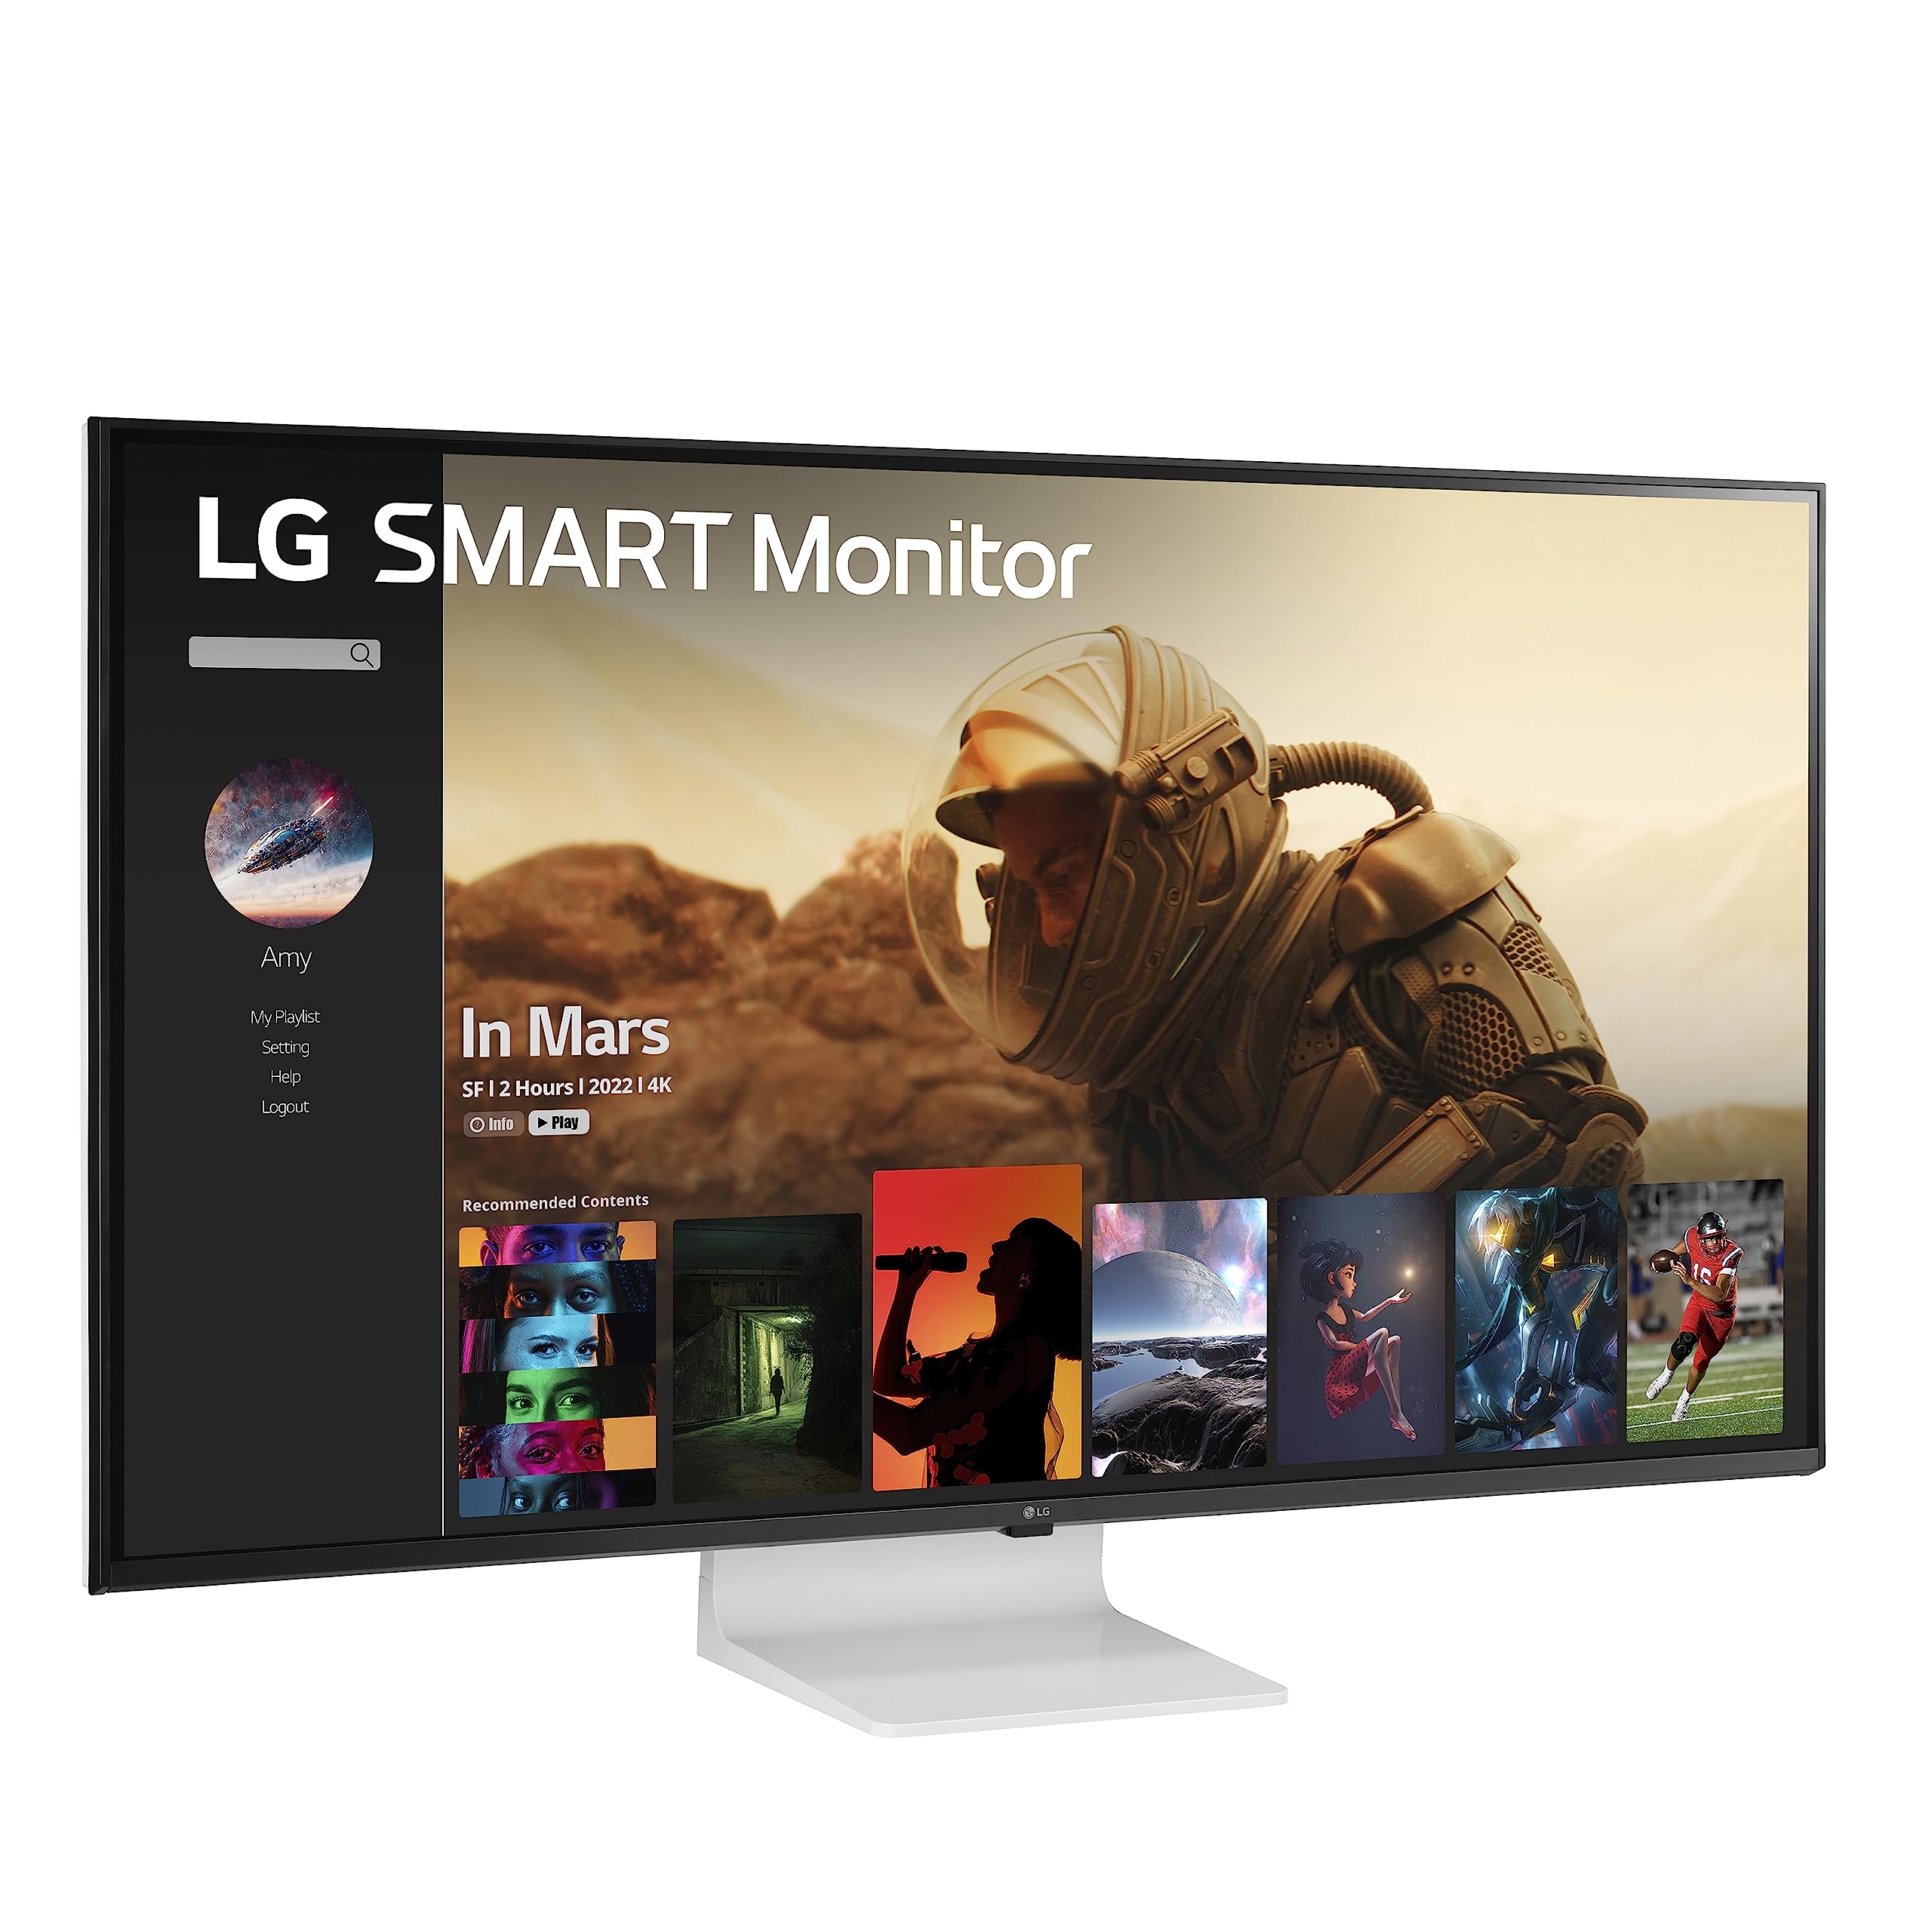 LG Smart Monitor (43SQ700S) -43-Inch 4K UHD(3840x2160) IPS Display, webOS Smart Monitor, ThinQ Home, Magic Remote, USB Type-C™, 2x10W Stereo Speakers, AirPlay 2, Screen Share, Bluetooth,White